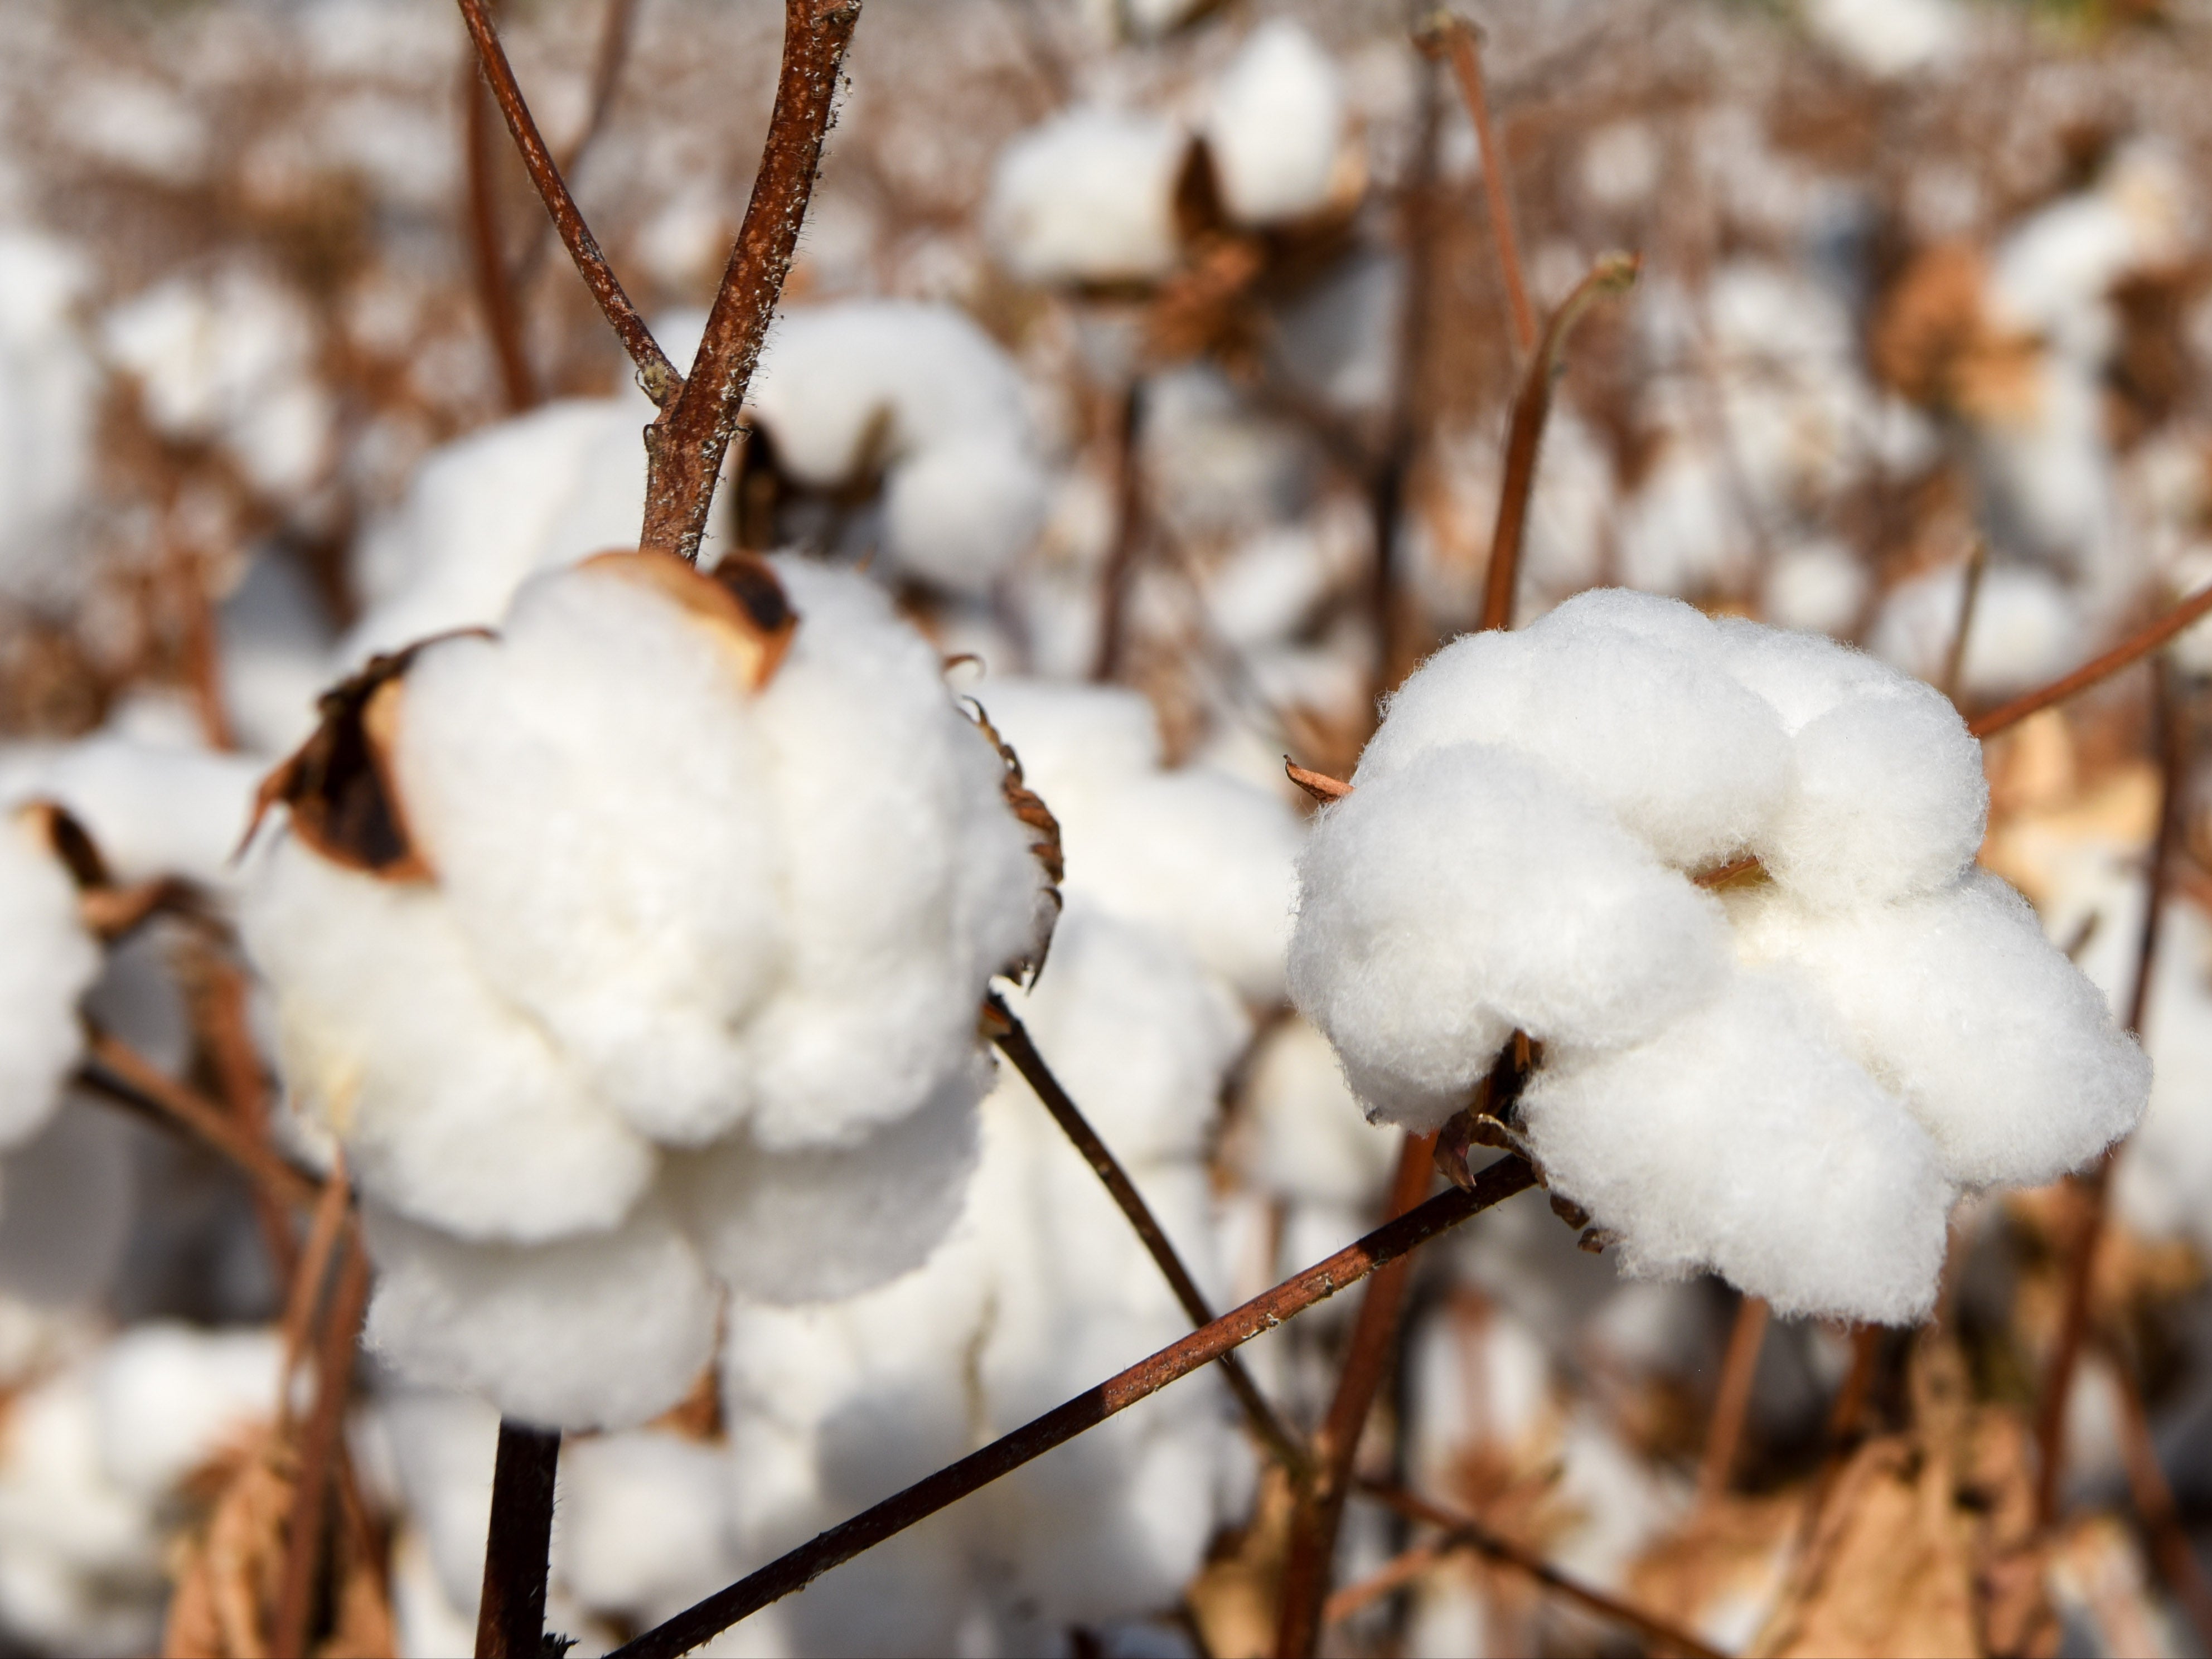 A cotton field in Manas County in the Xinjiang region of China